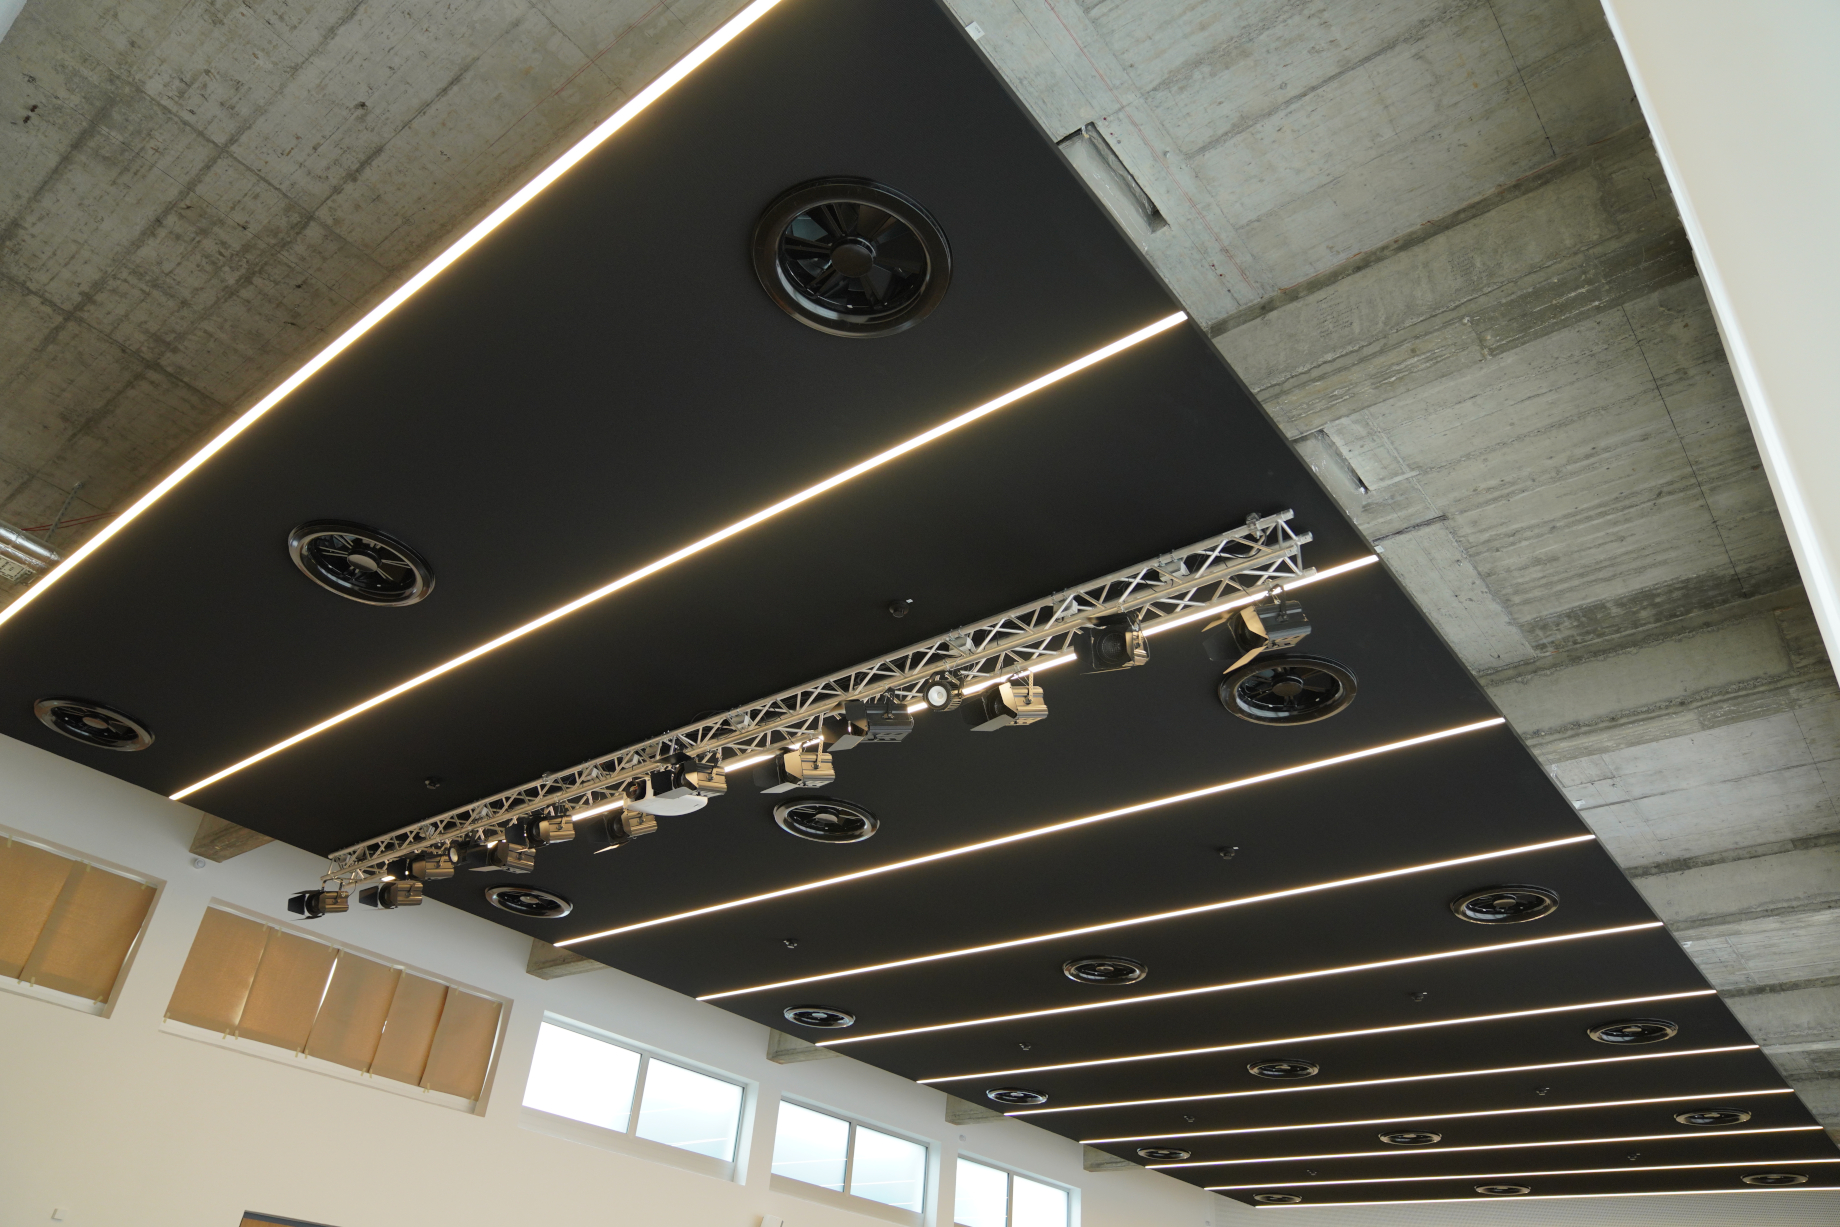 Richter suspended ceiling system with lighting